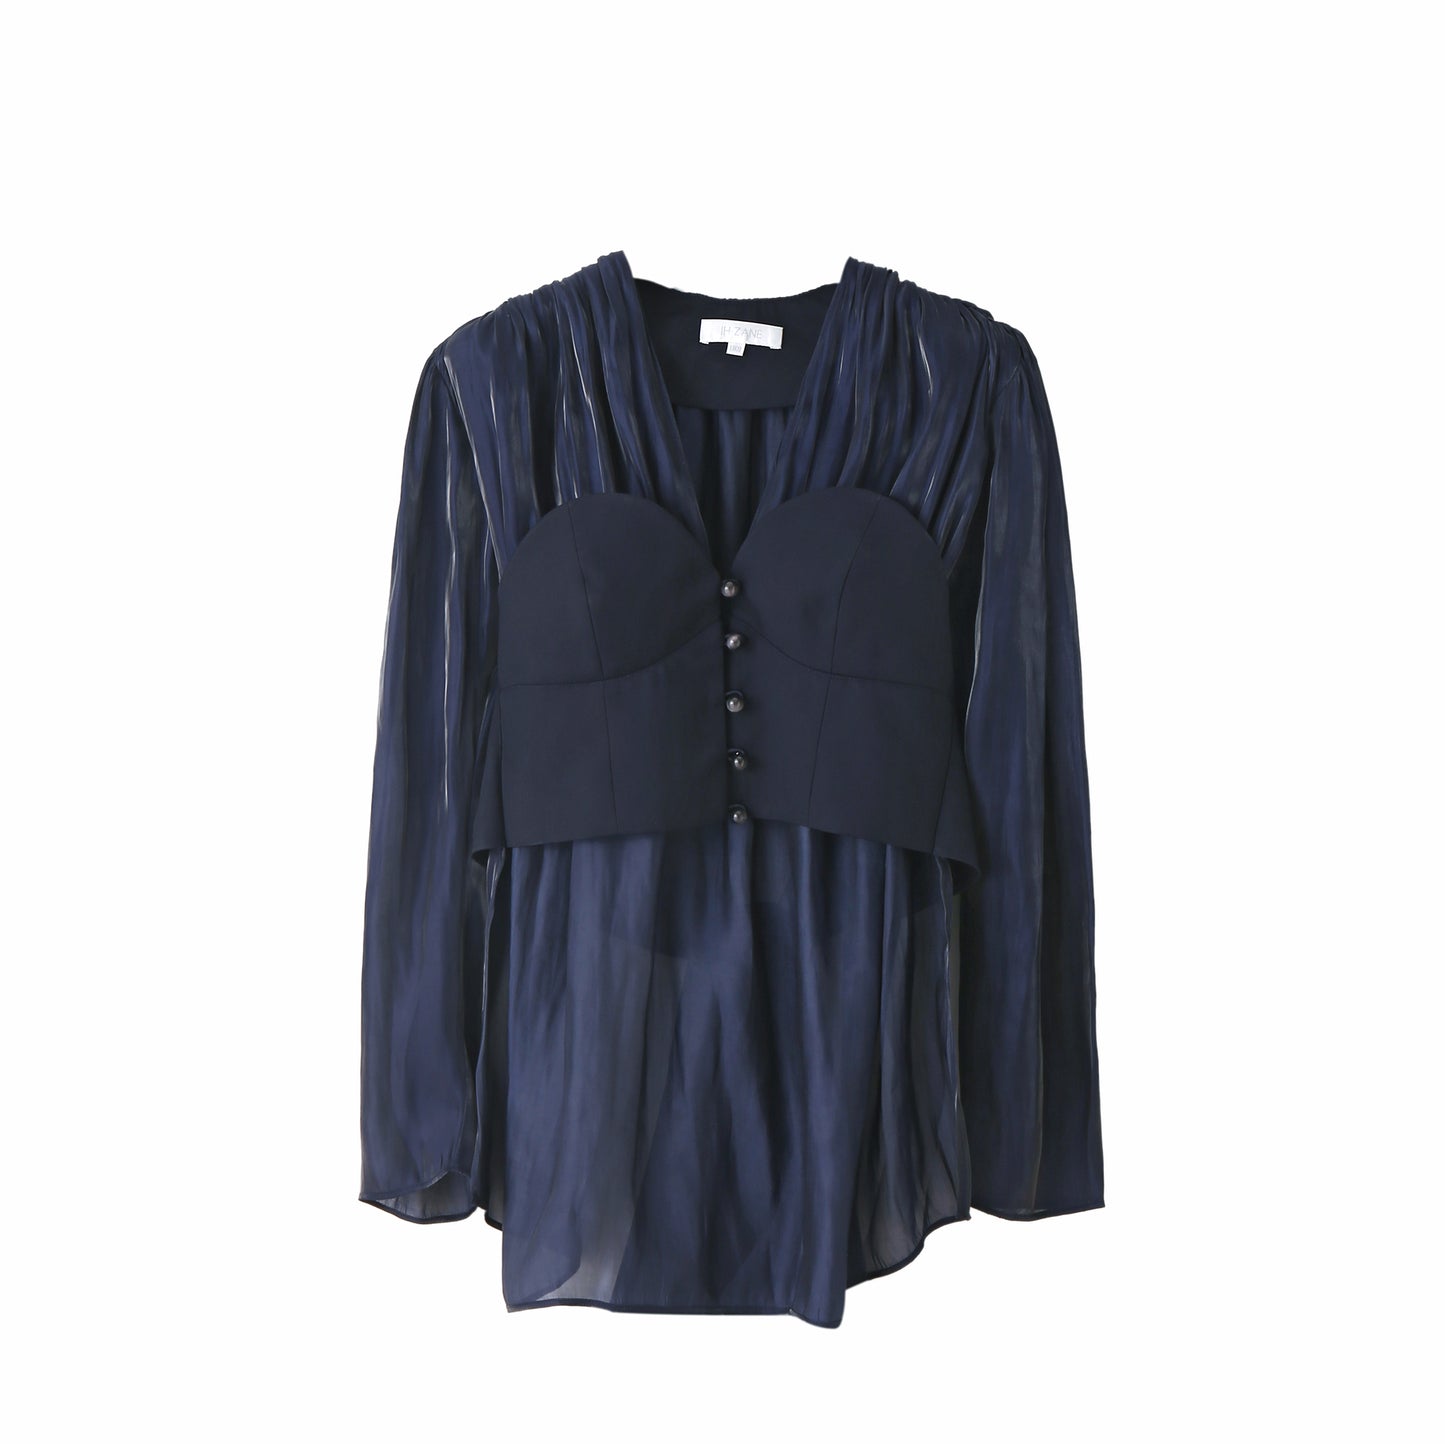 Winifred Corset Top in Navy